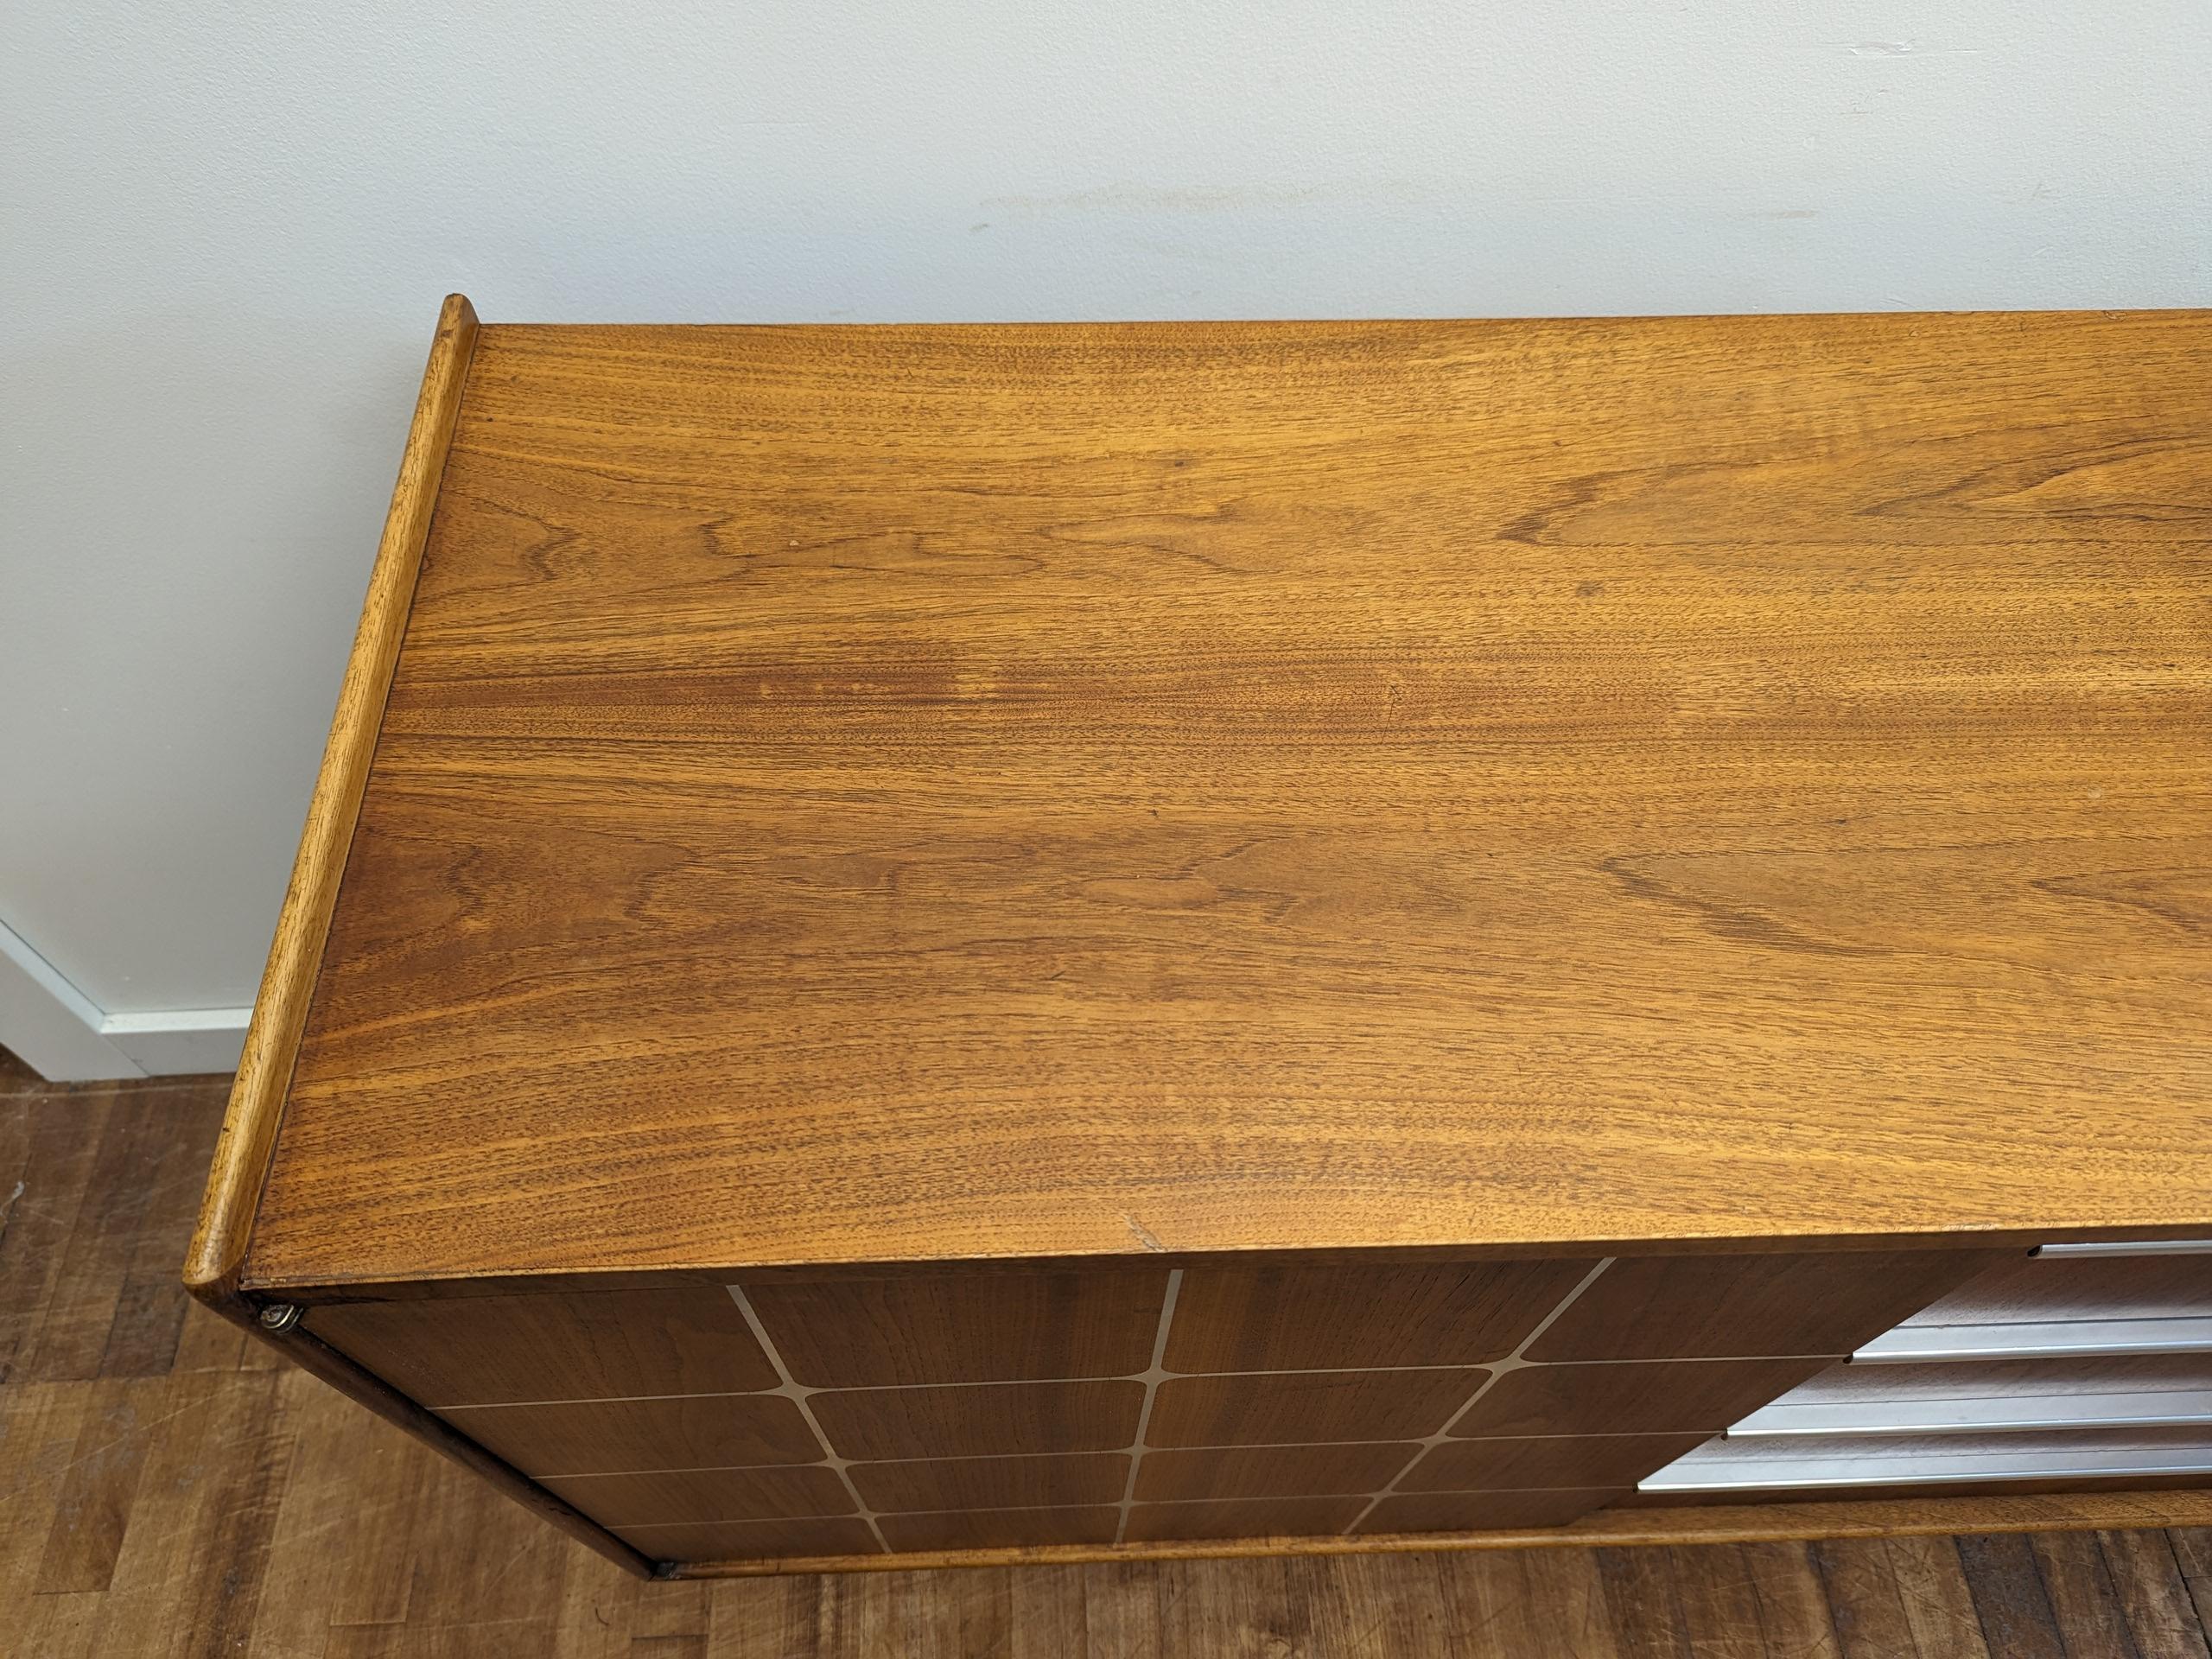 Aluminum Edmond Spence Mid Century Credenza Sideboard with Inlay.   For Sale